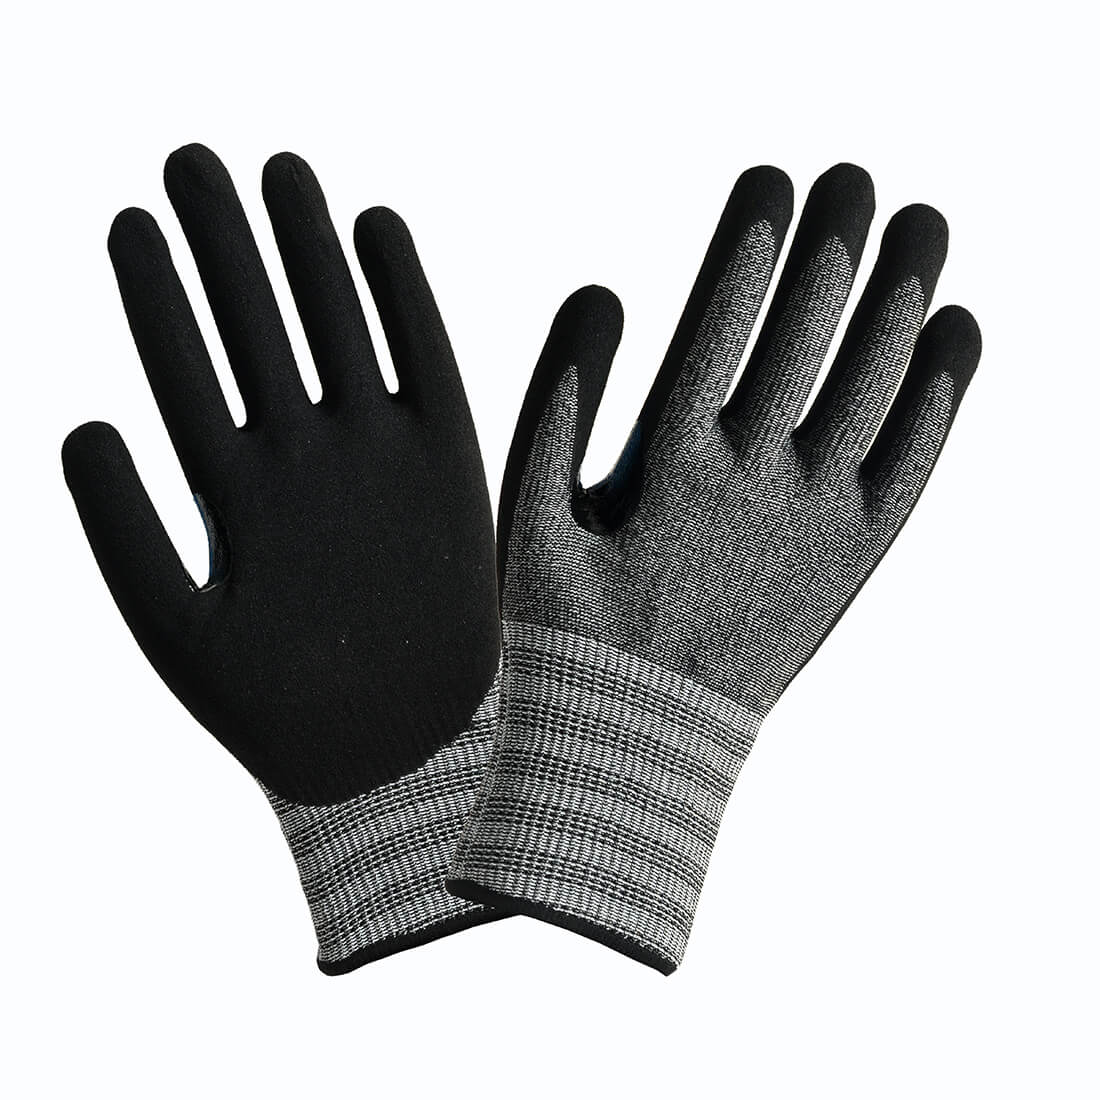 Cut resistance gloves, latex palm coated Featured Image